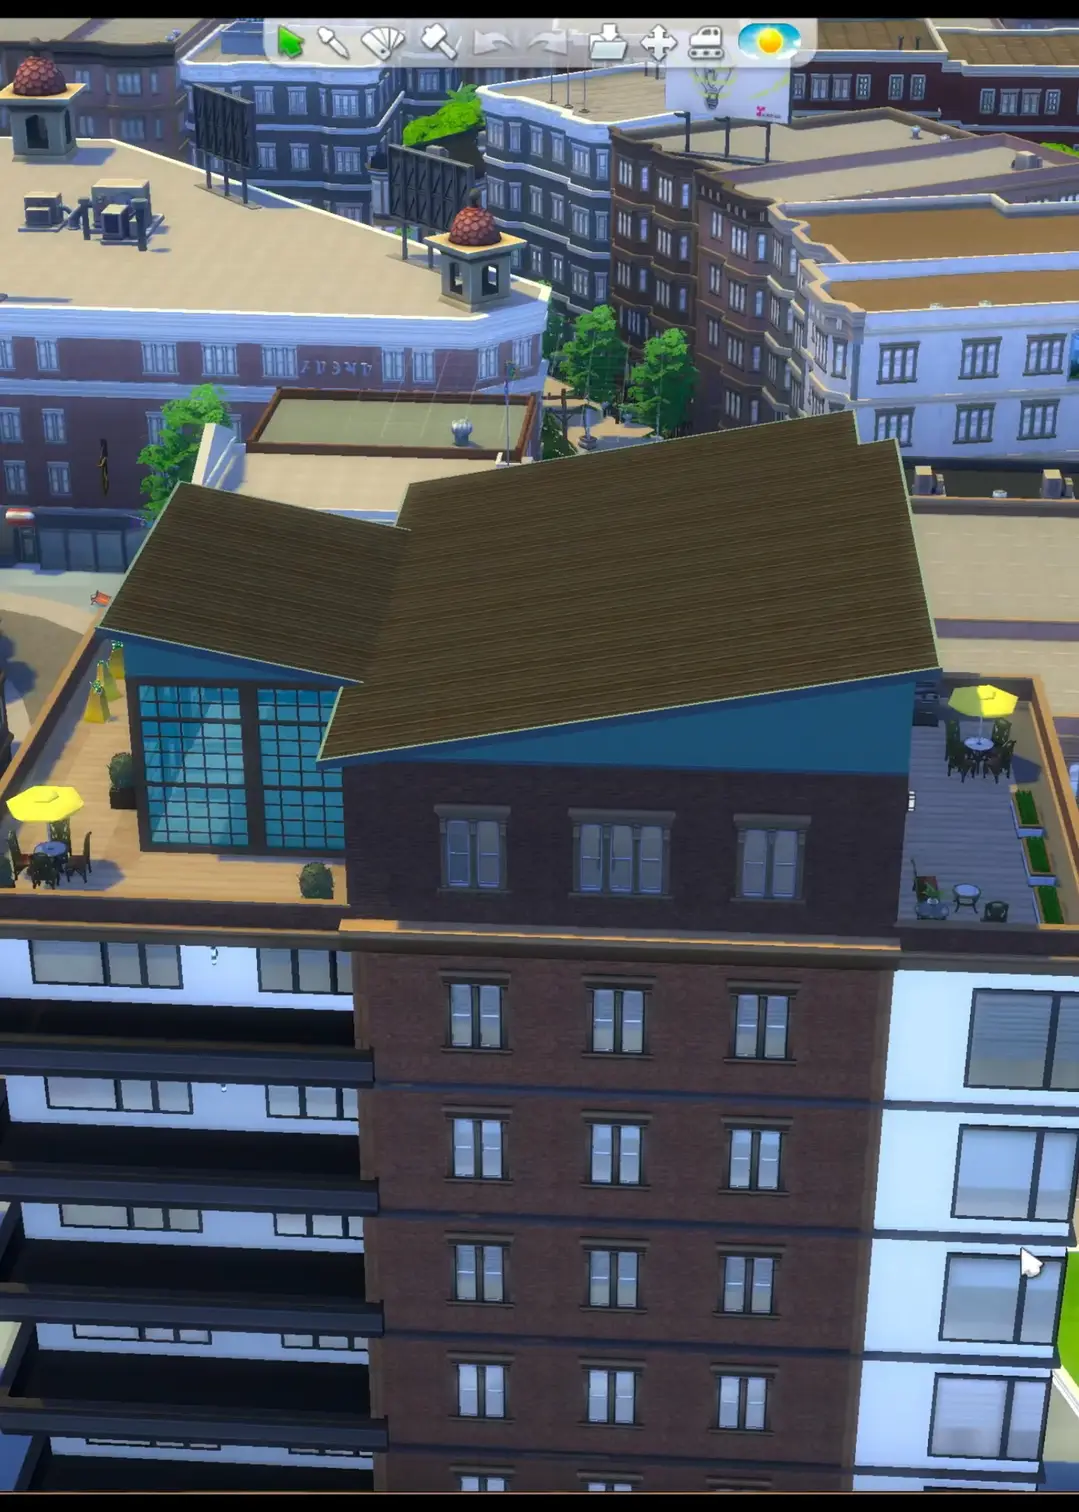 Sims Community on X: What if you had a one stop for ALL #TheSims4